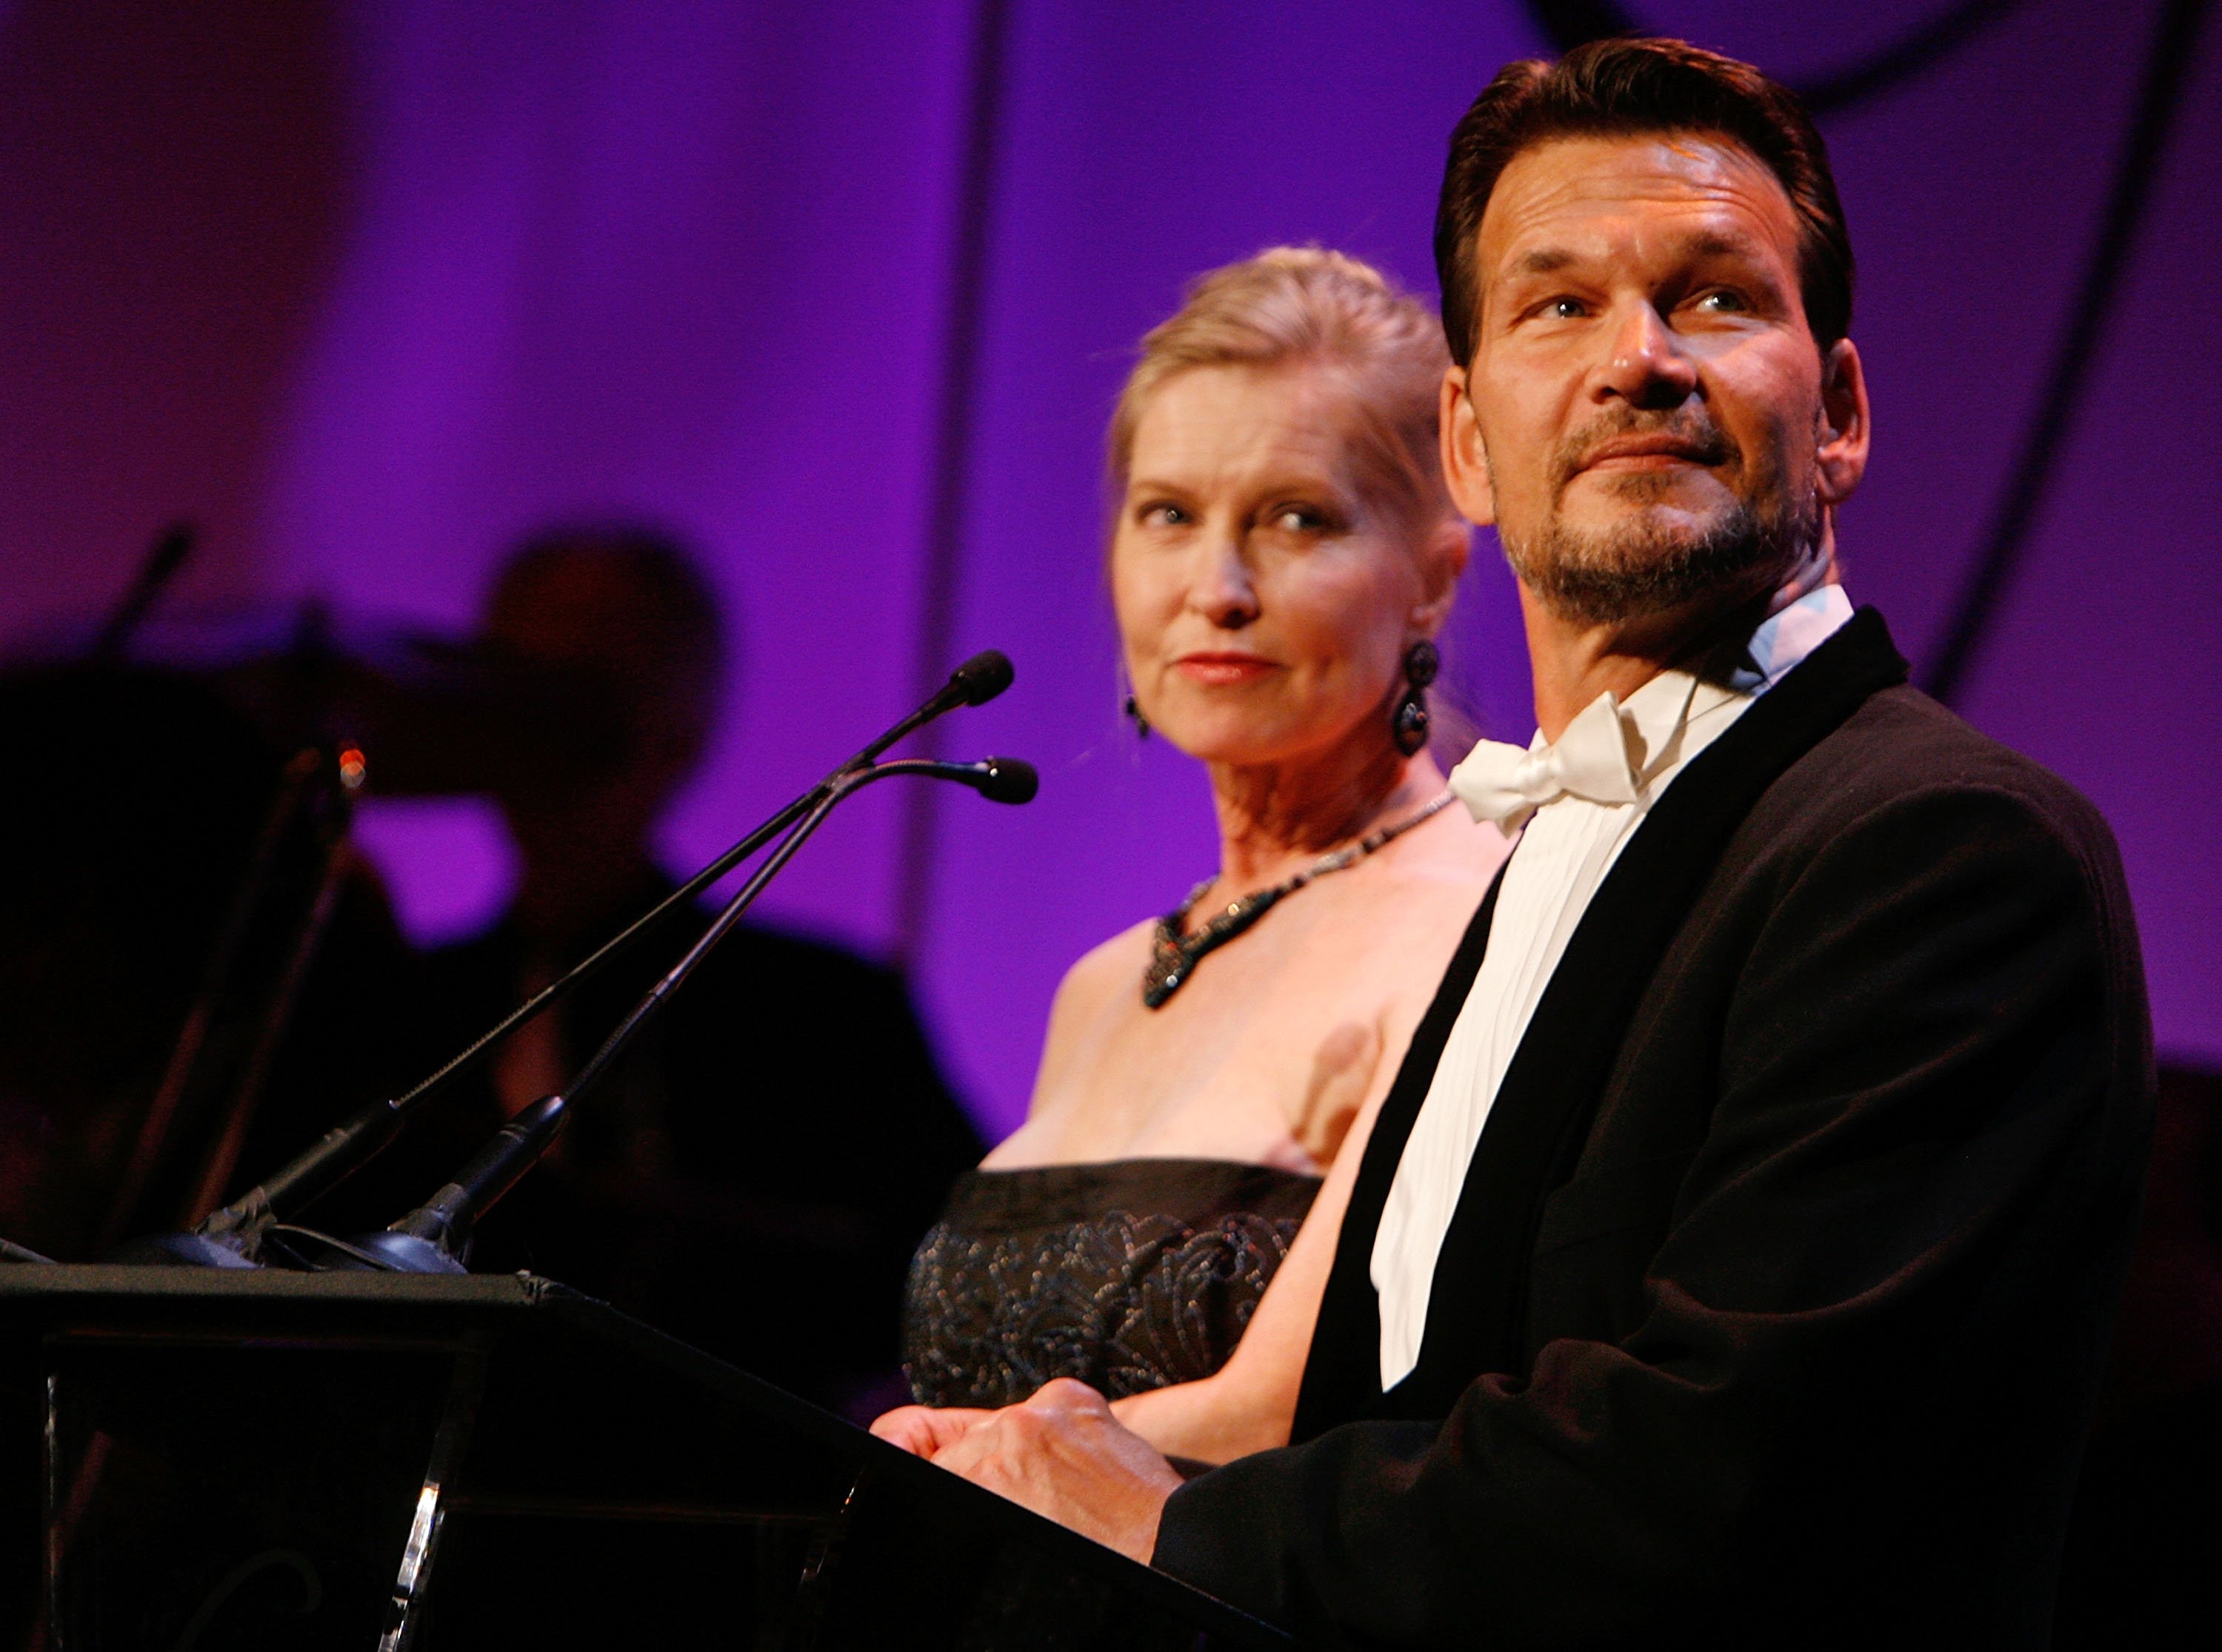 Lisa Niemi (L) and actor Patrick Swayze speak onstage during the 9th annual Costume Designers Guild Awards held at the Beverly Wilshire Hotel on February 17, 2007 in Beverly Hills, California. | Photo: Getty Images